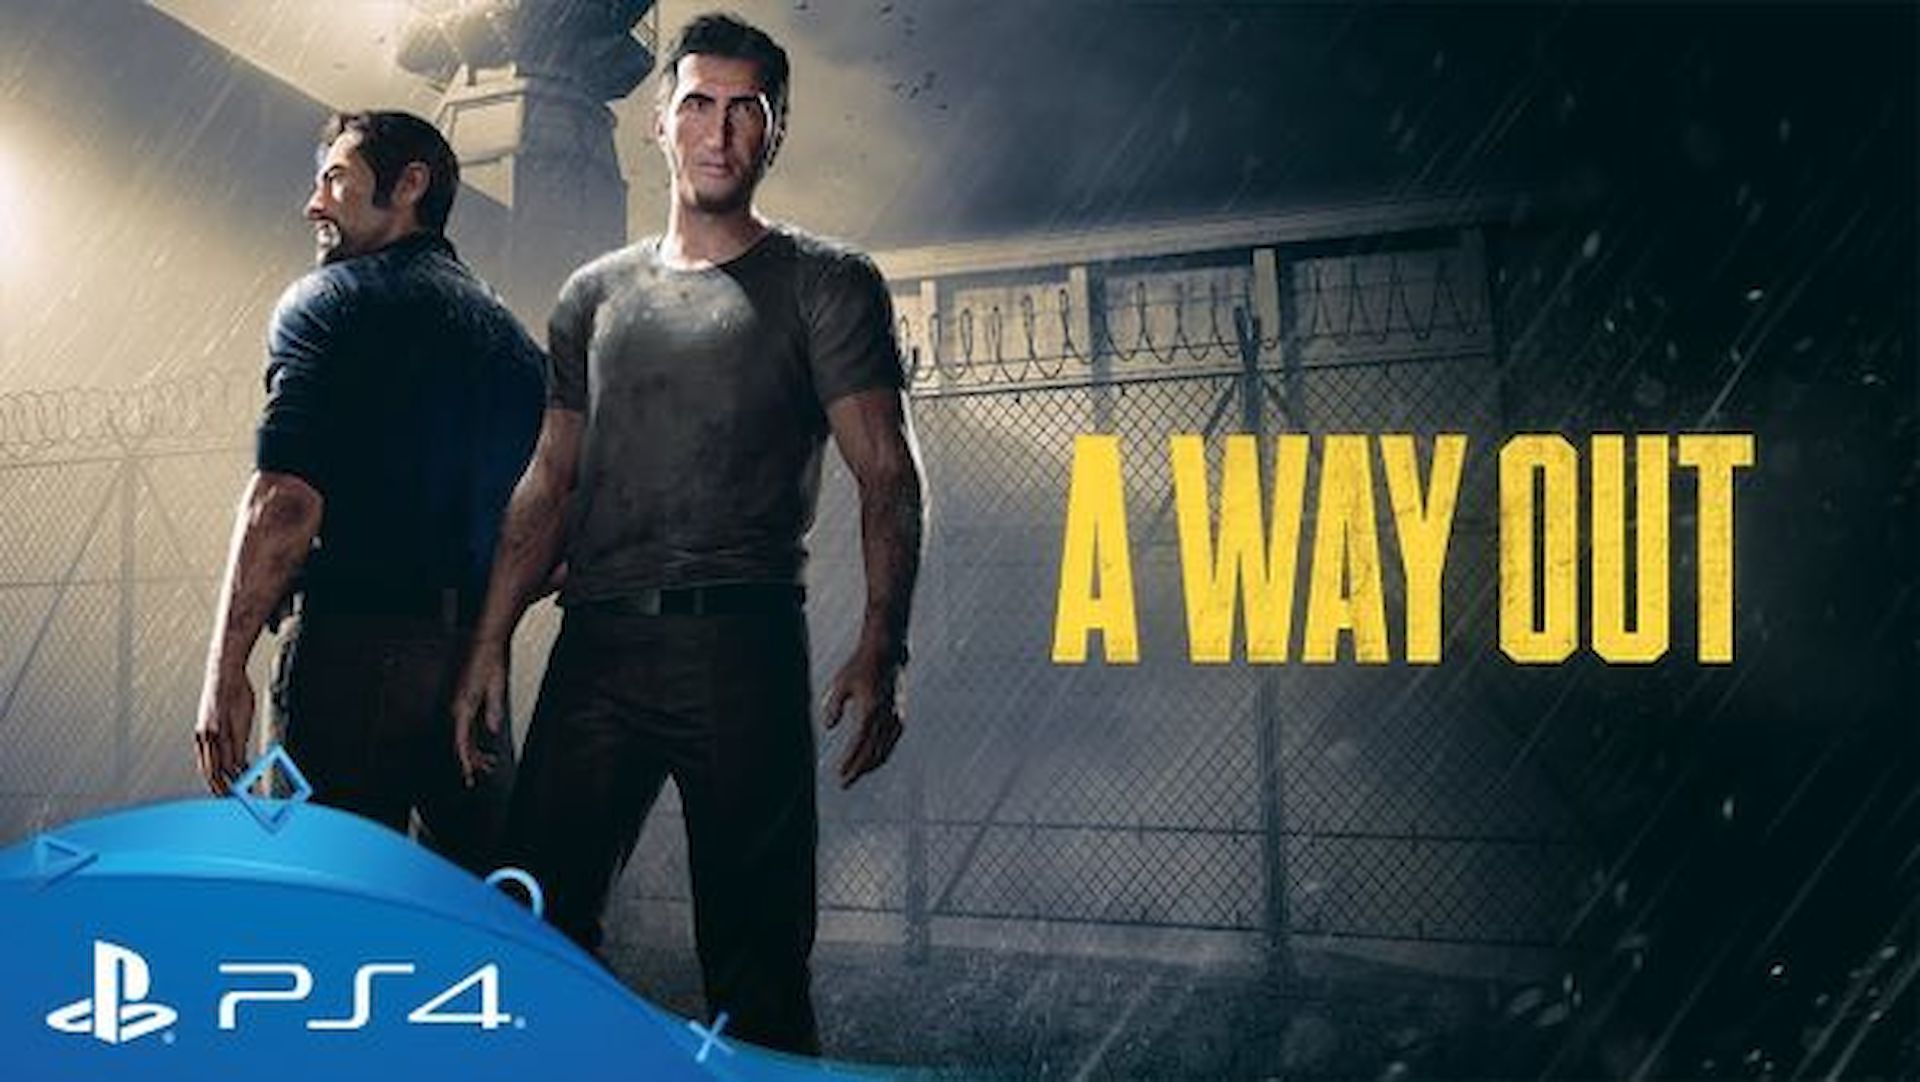 Дай аут. Игра a way out ps4. A way out обложка. A way out Лео. A way out обложка игры.